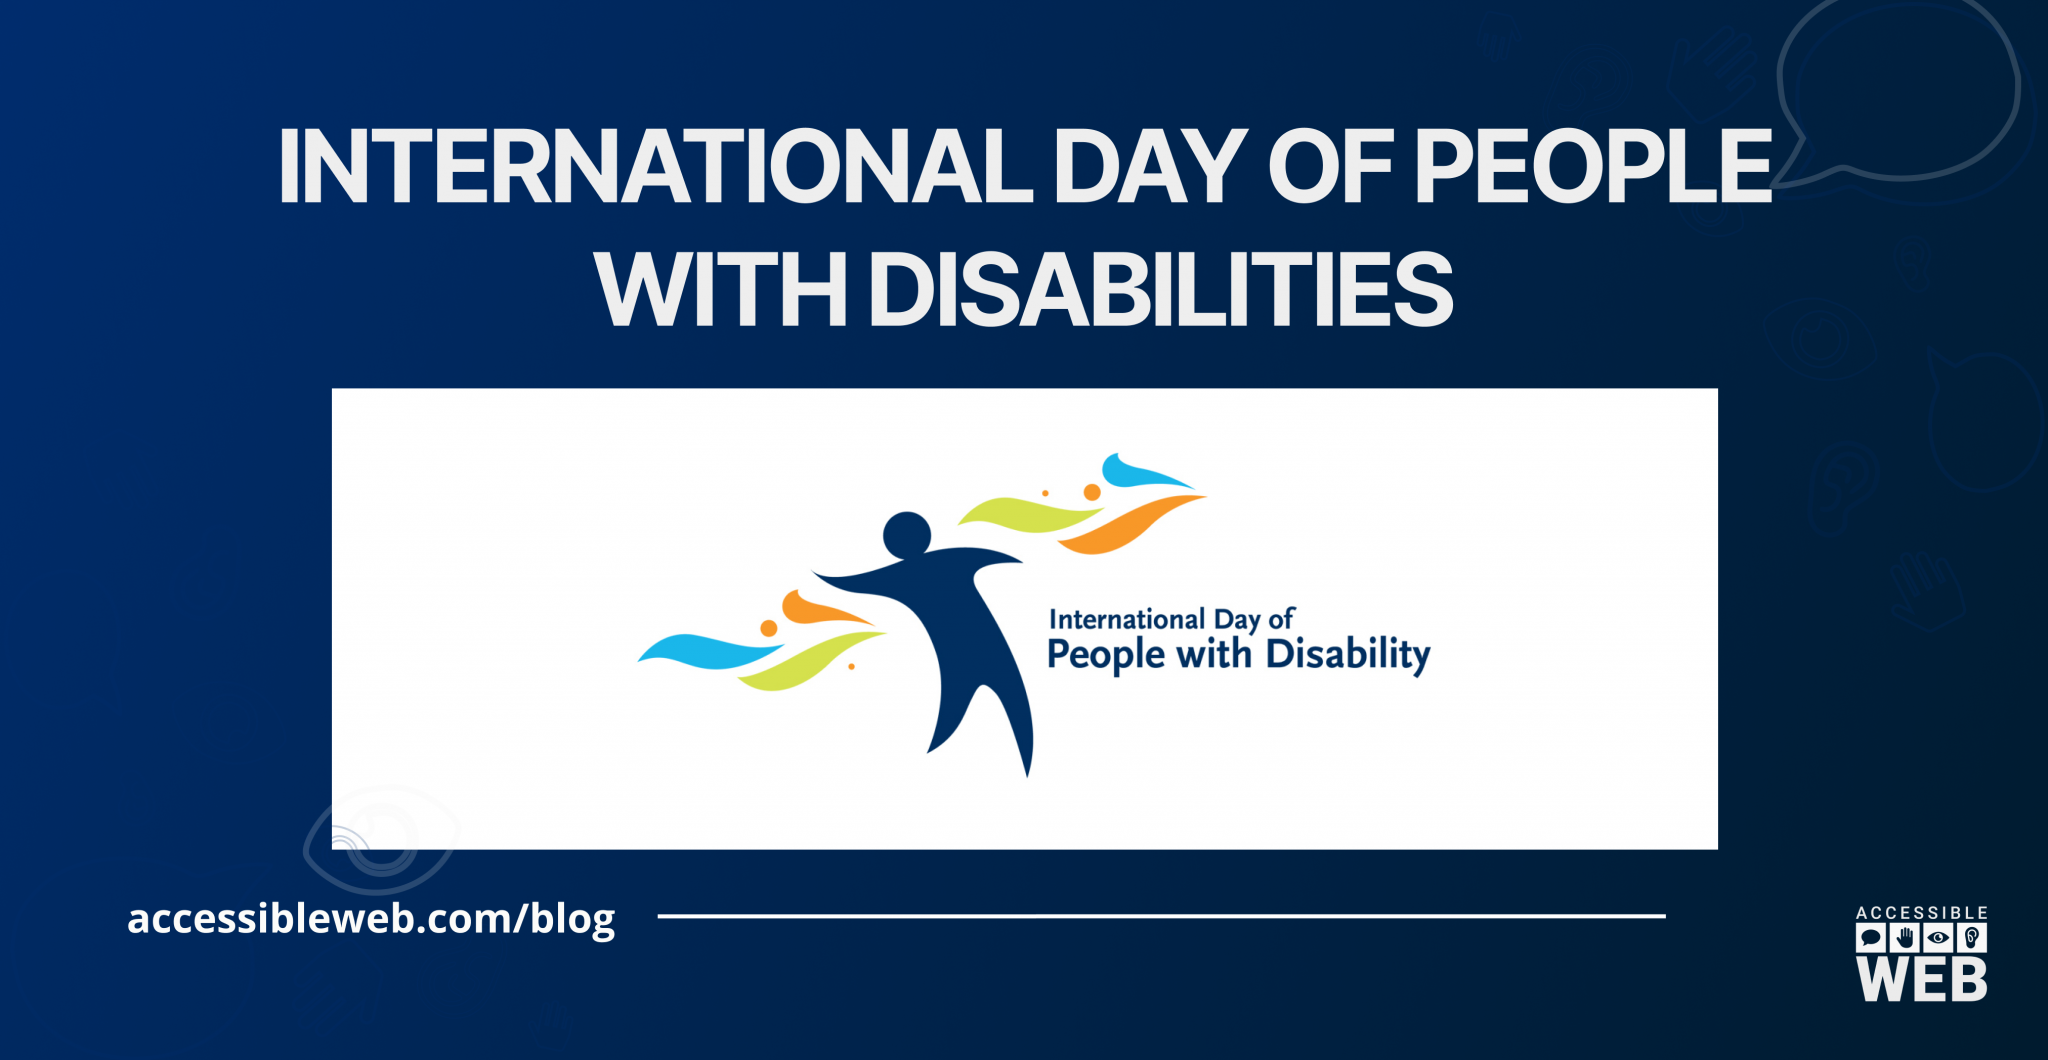 "international day of people with disabilities"